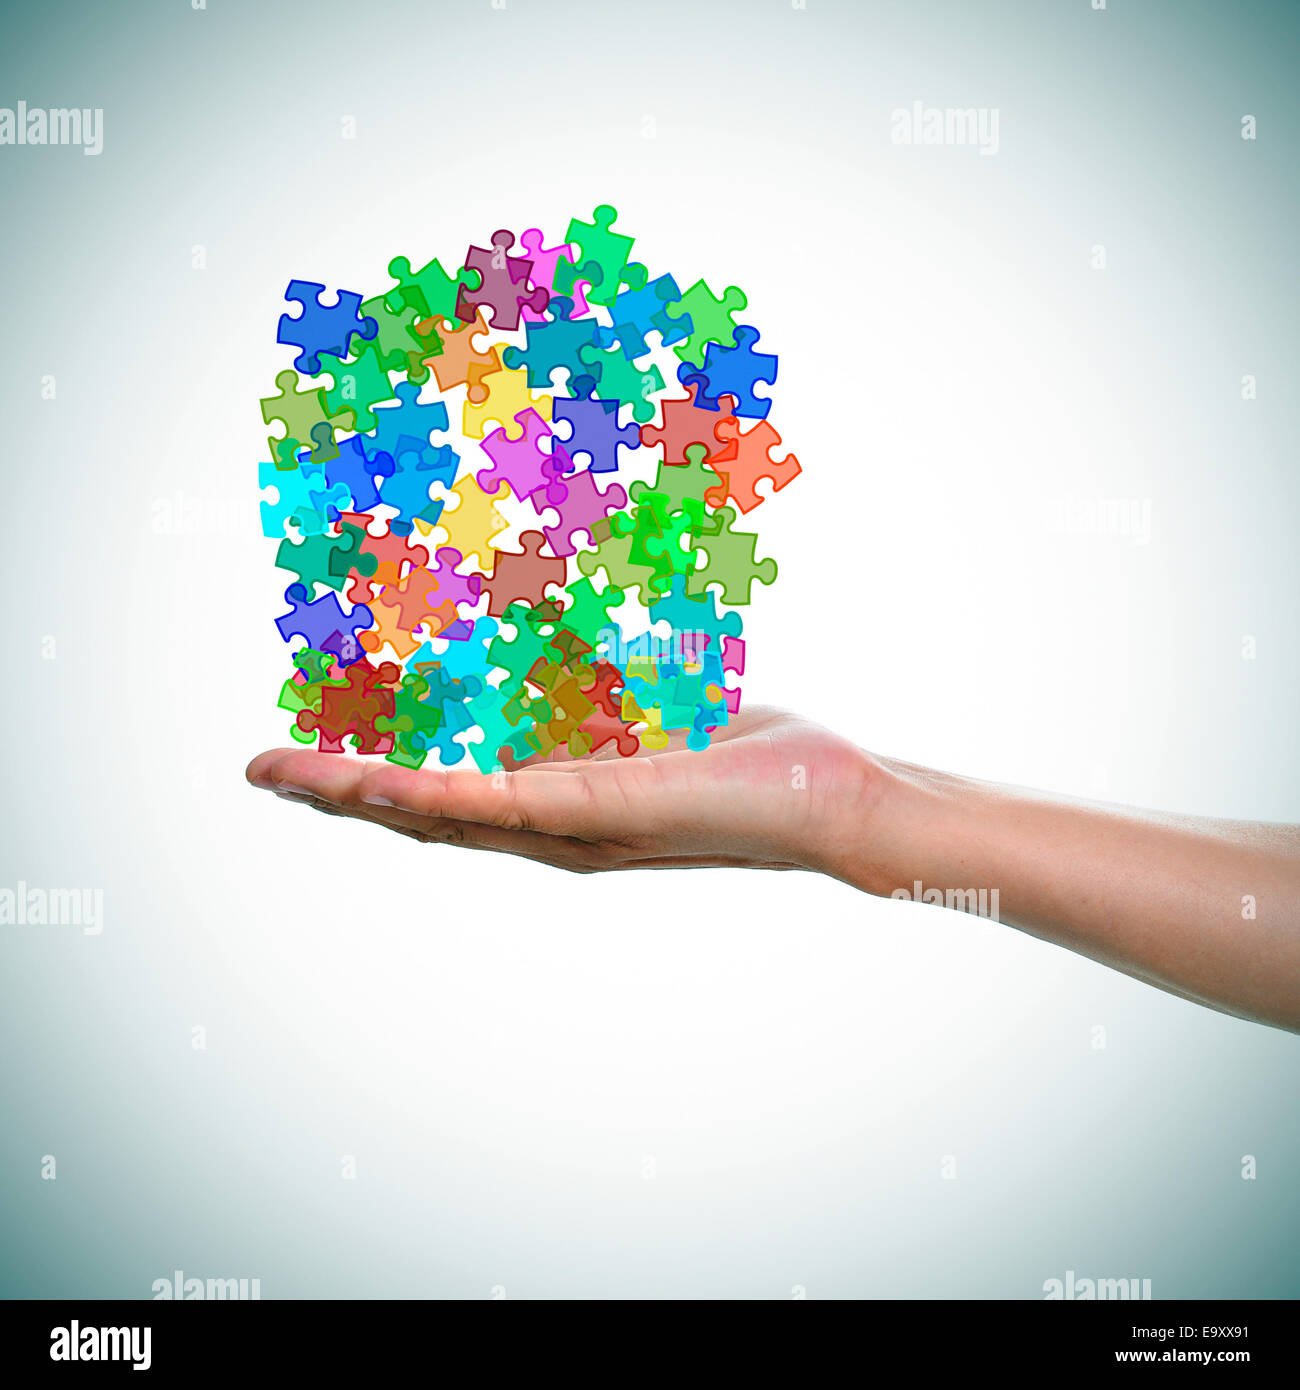 a man hand with a pile of puzzle pieces of different colors as the symbol for the autism awareness Stock Photo